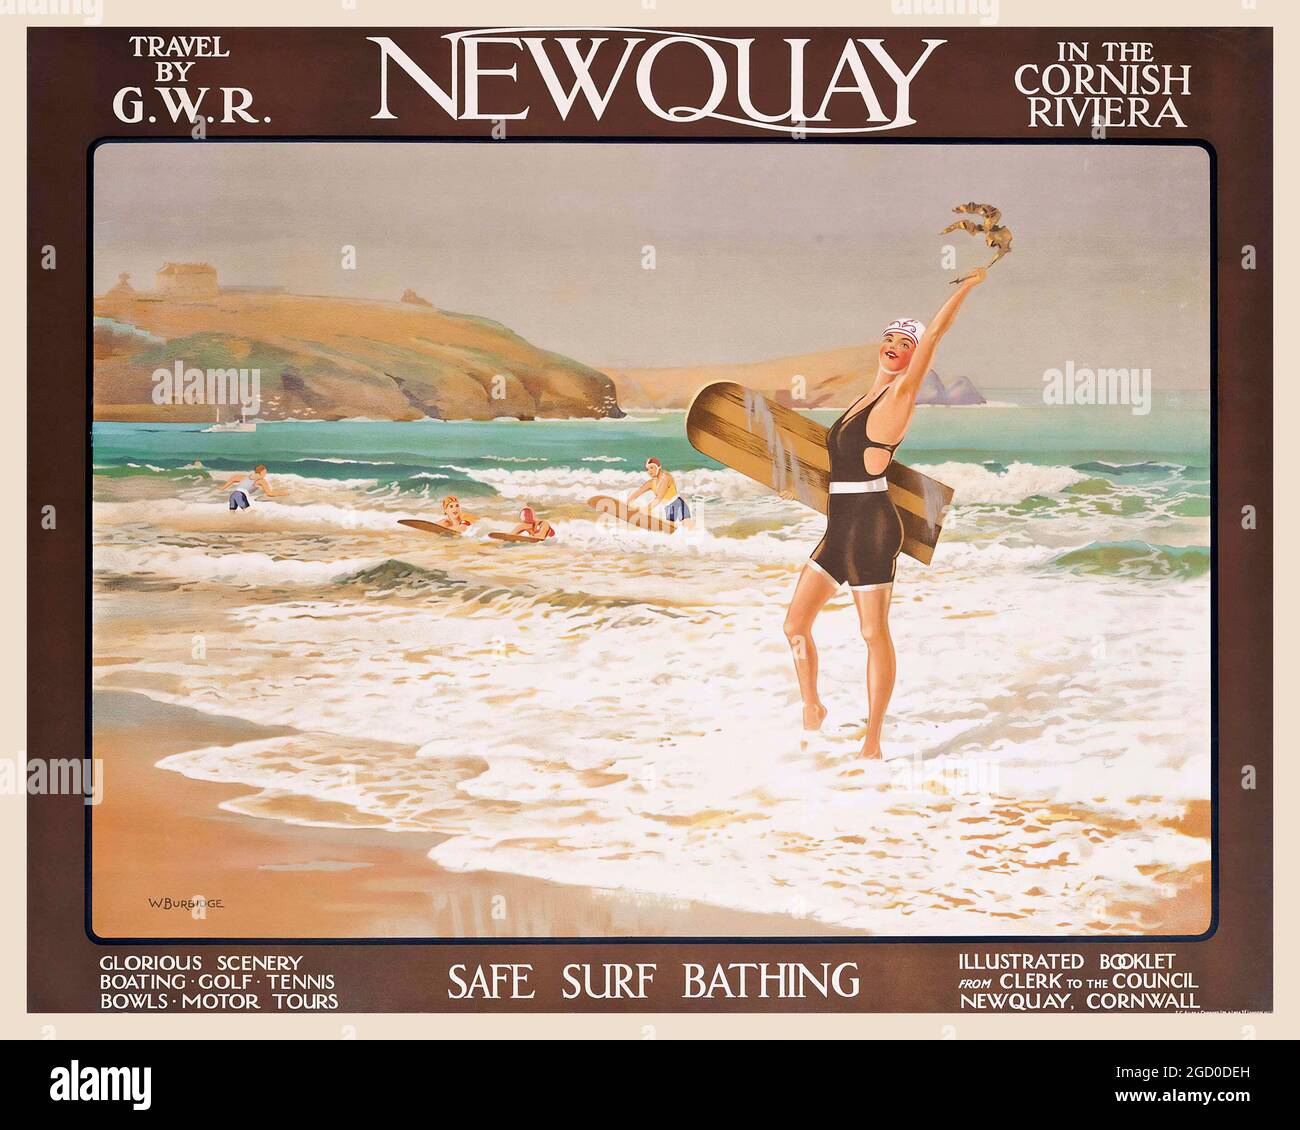 SAFE SURF BATHING – Vintage Travel Poster, Newquay in the Cornish Riviera. Travel by G.W.R. Stock Photo